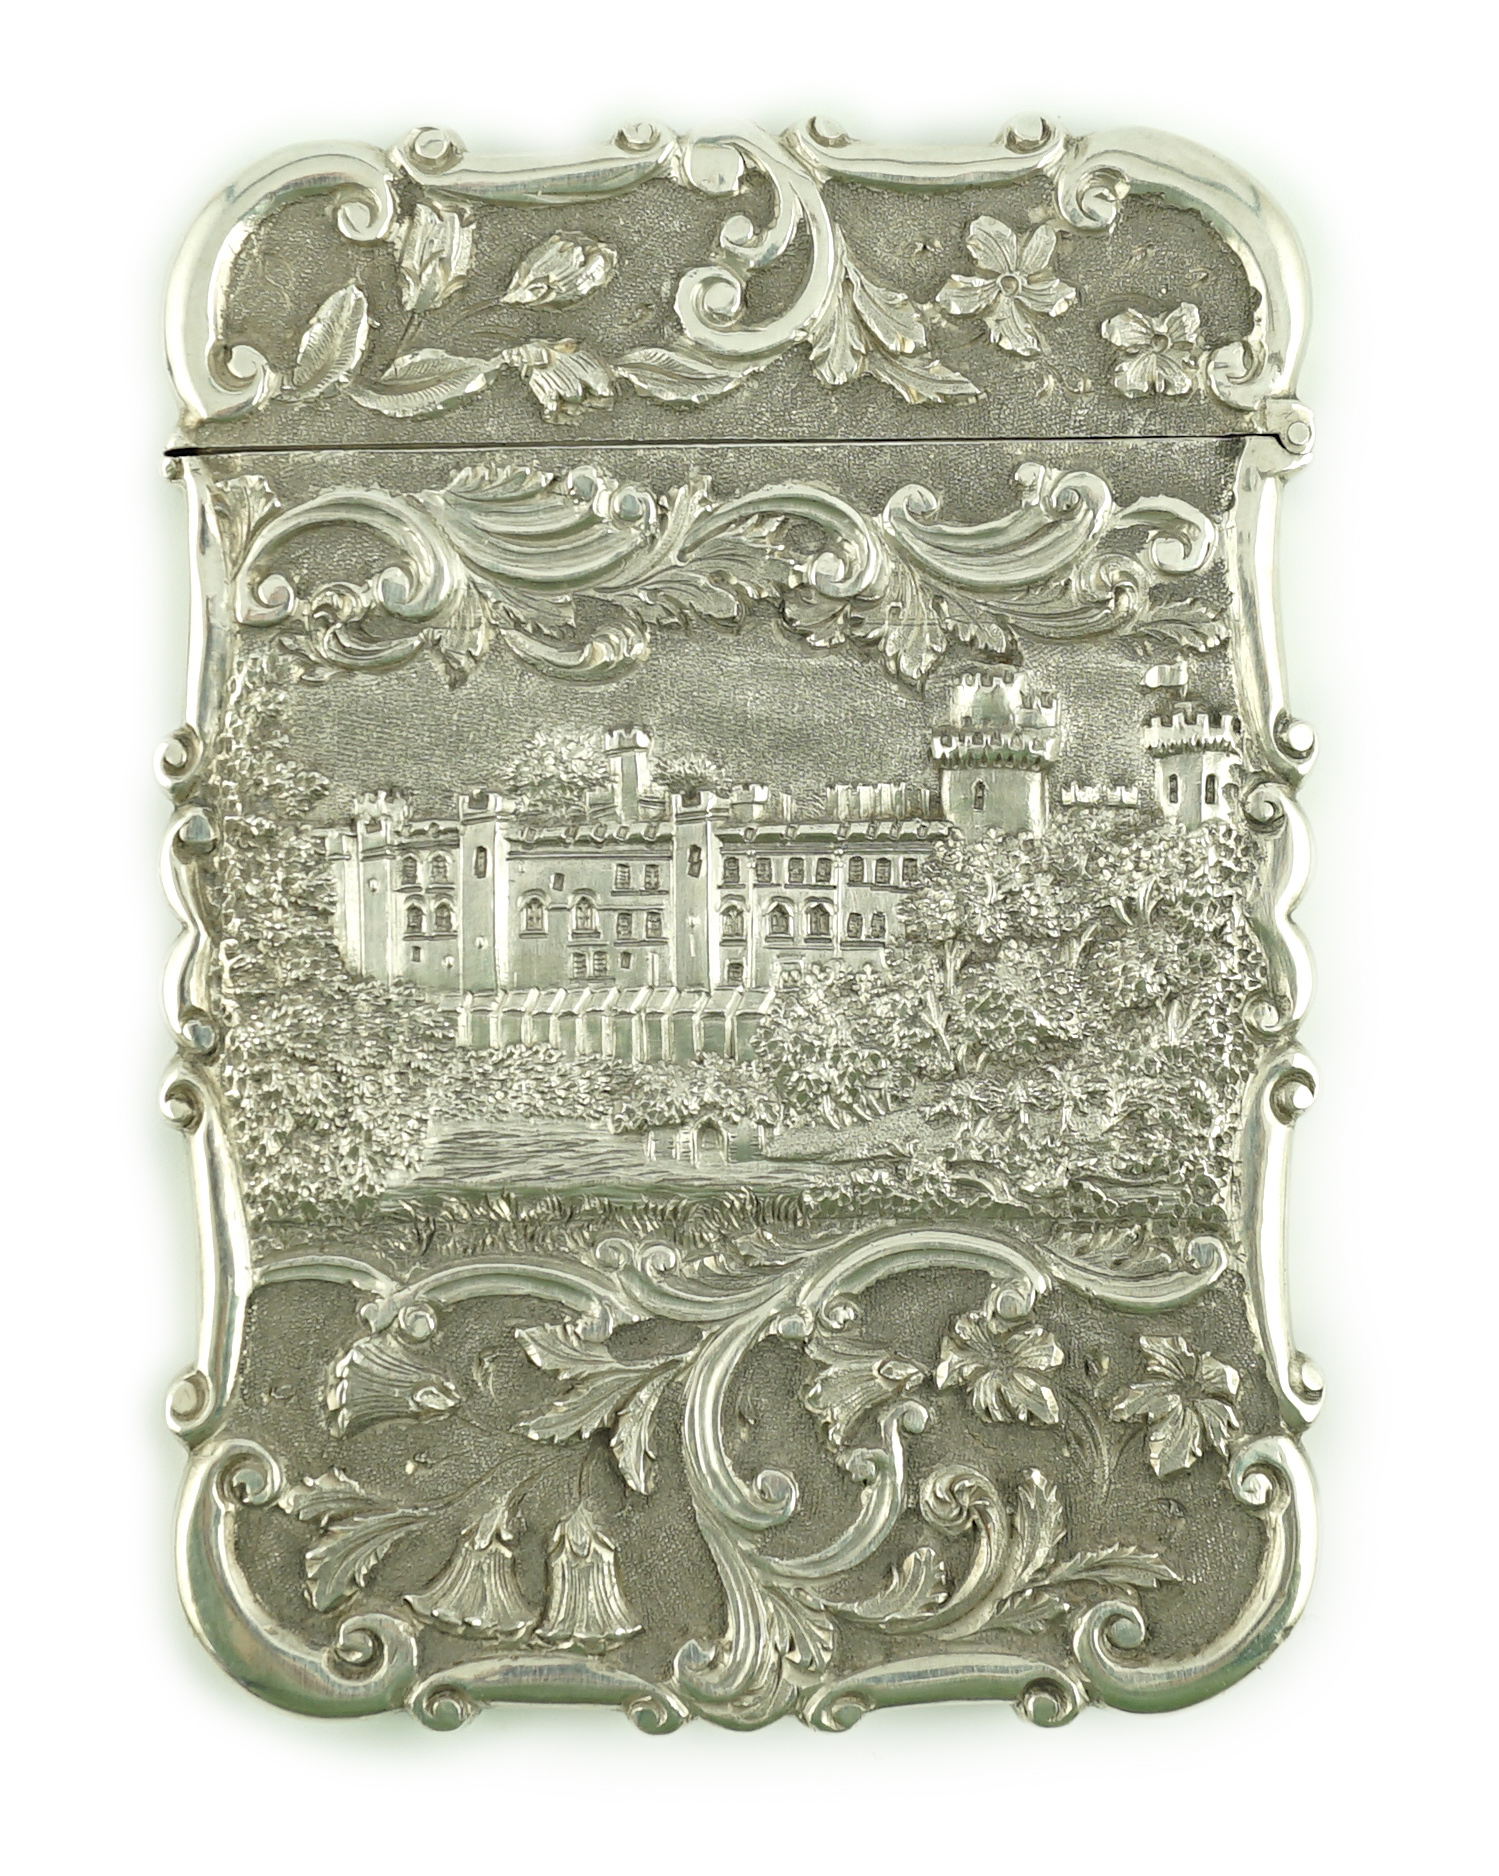 An early Victorian silver 'castle top' card case by Nathaniel Mills